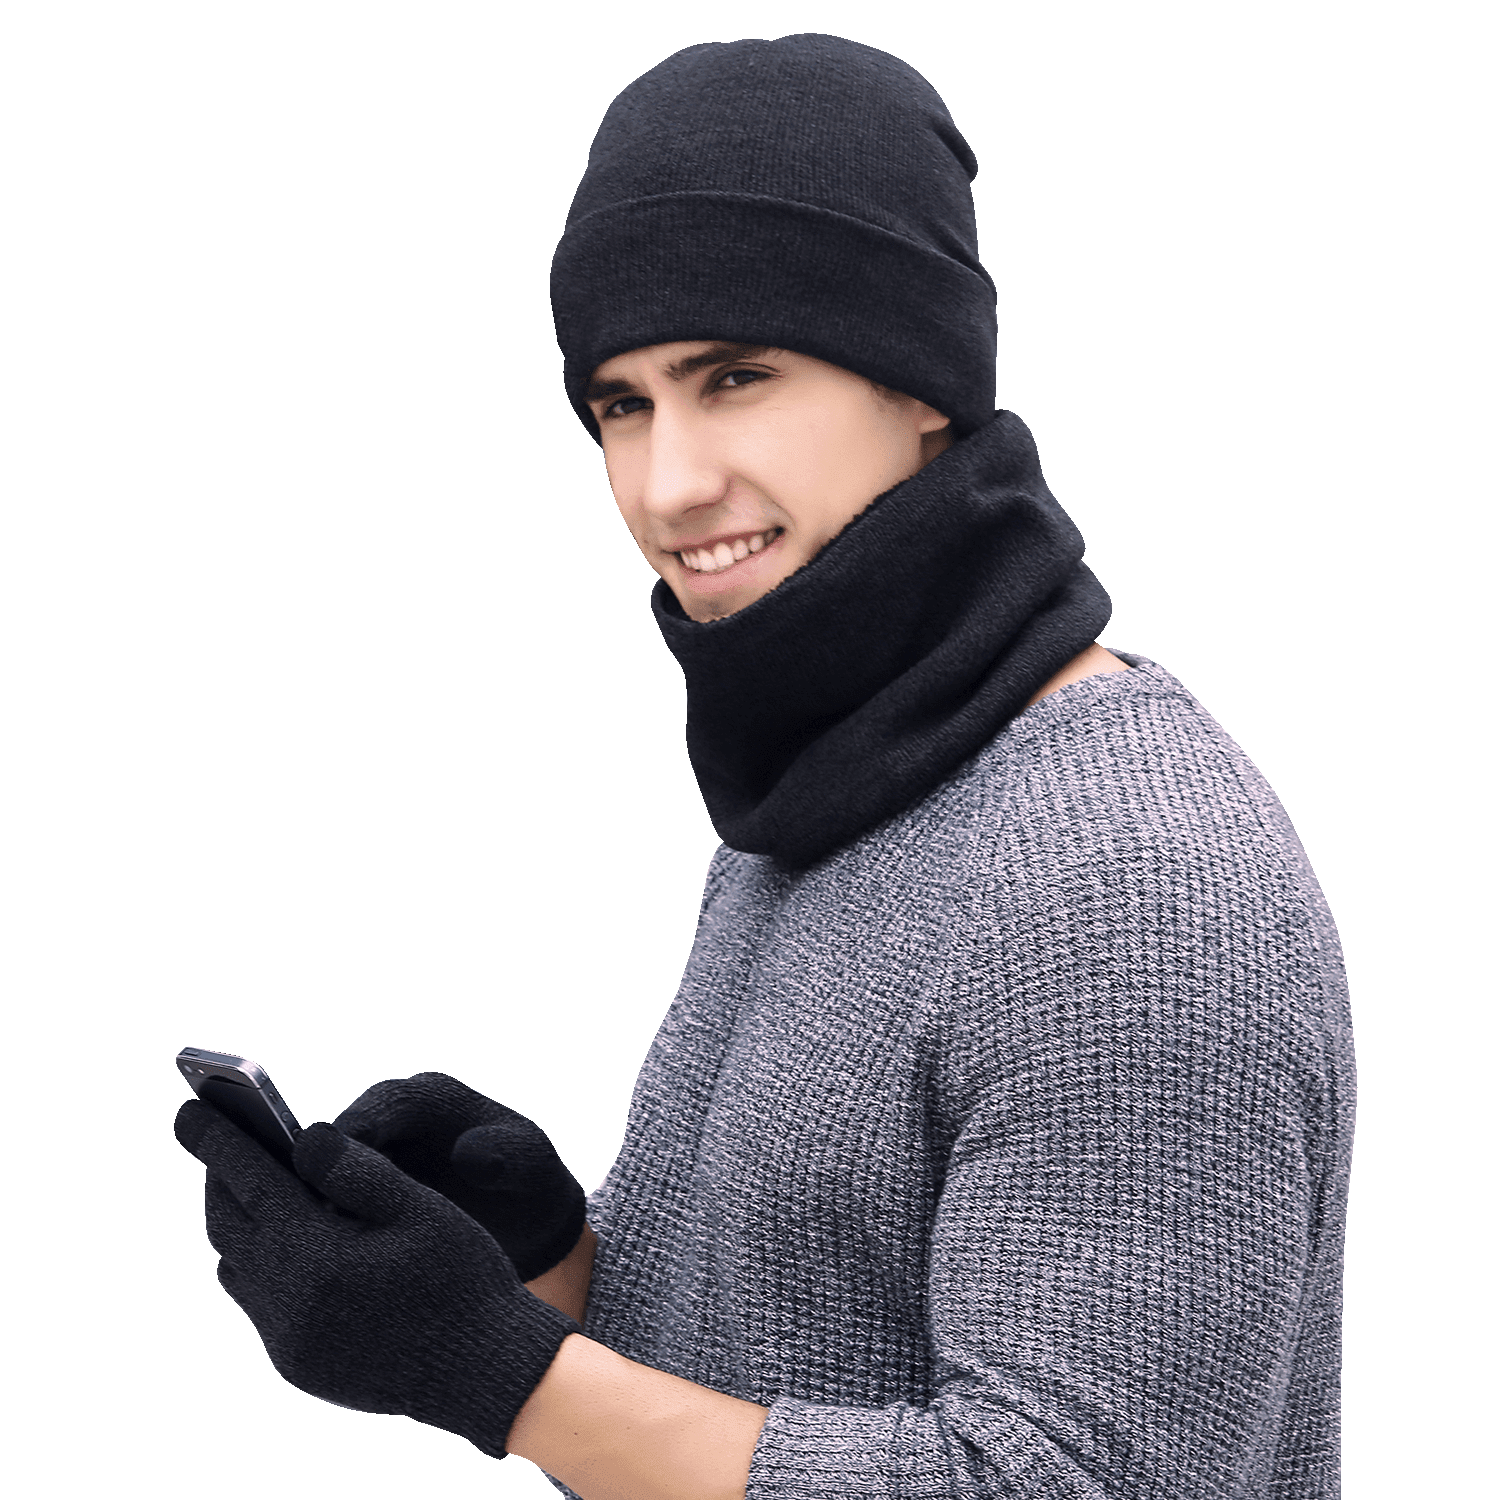 LYworld Winter Hat Scarf and Gloves Set Knitted Warm Neck Warmer Touchscreen Gloves and Berets for Women Winter Outdoor Sports Set